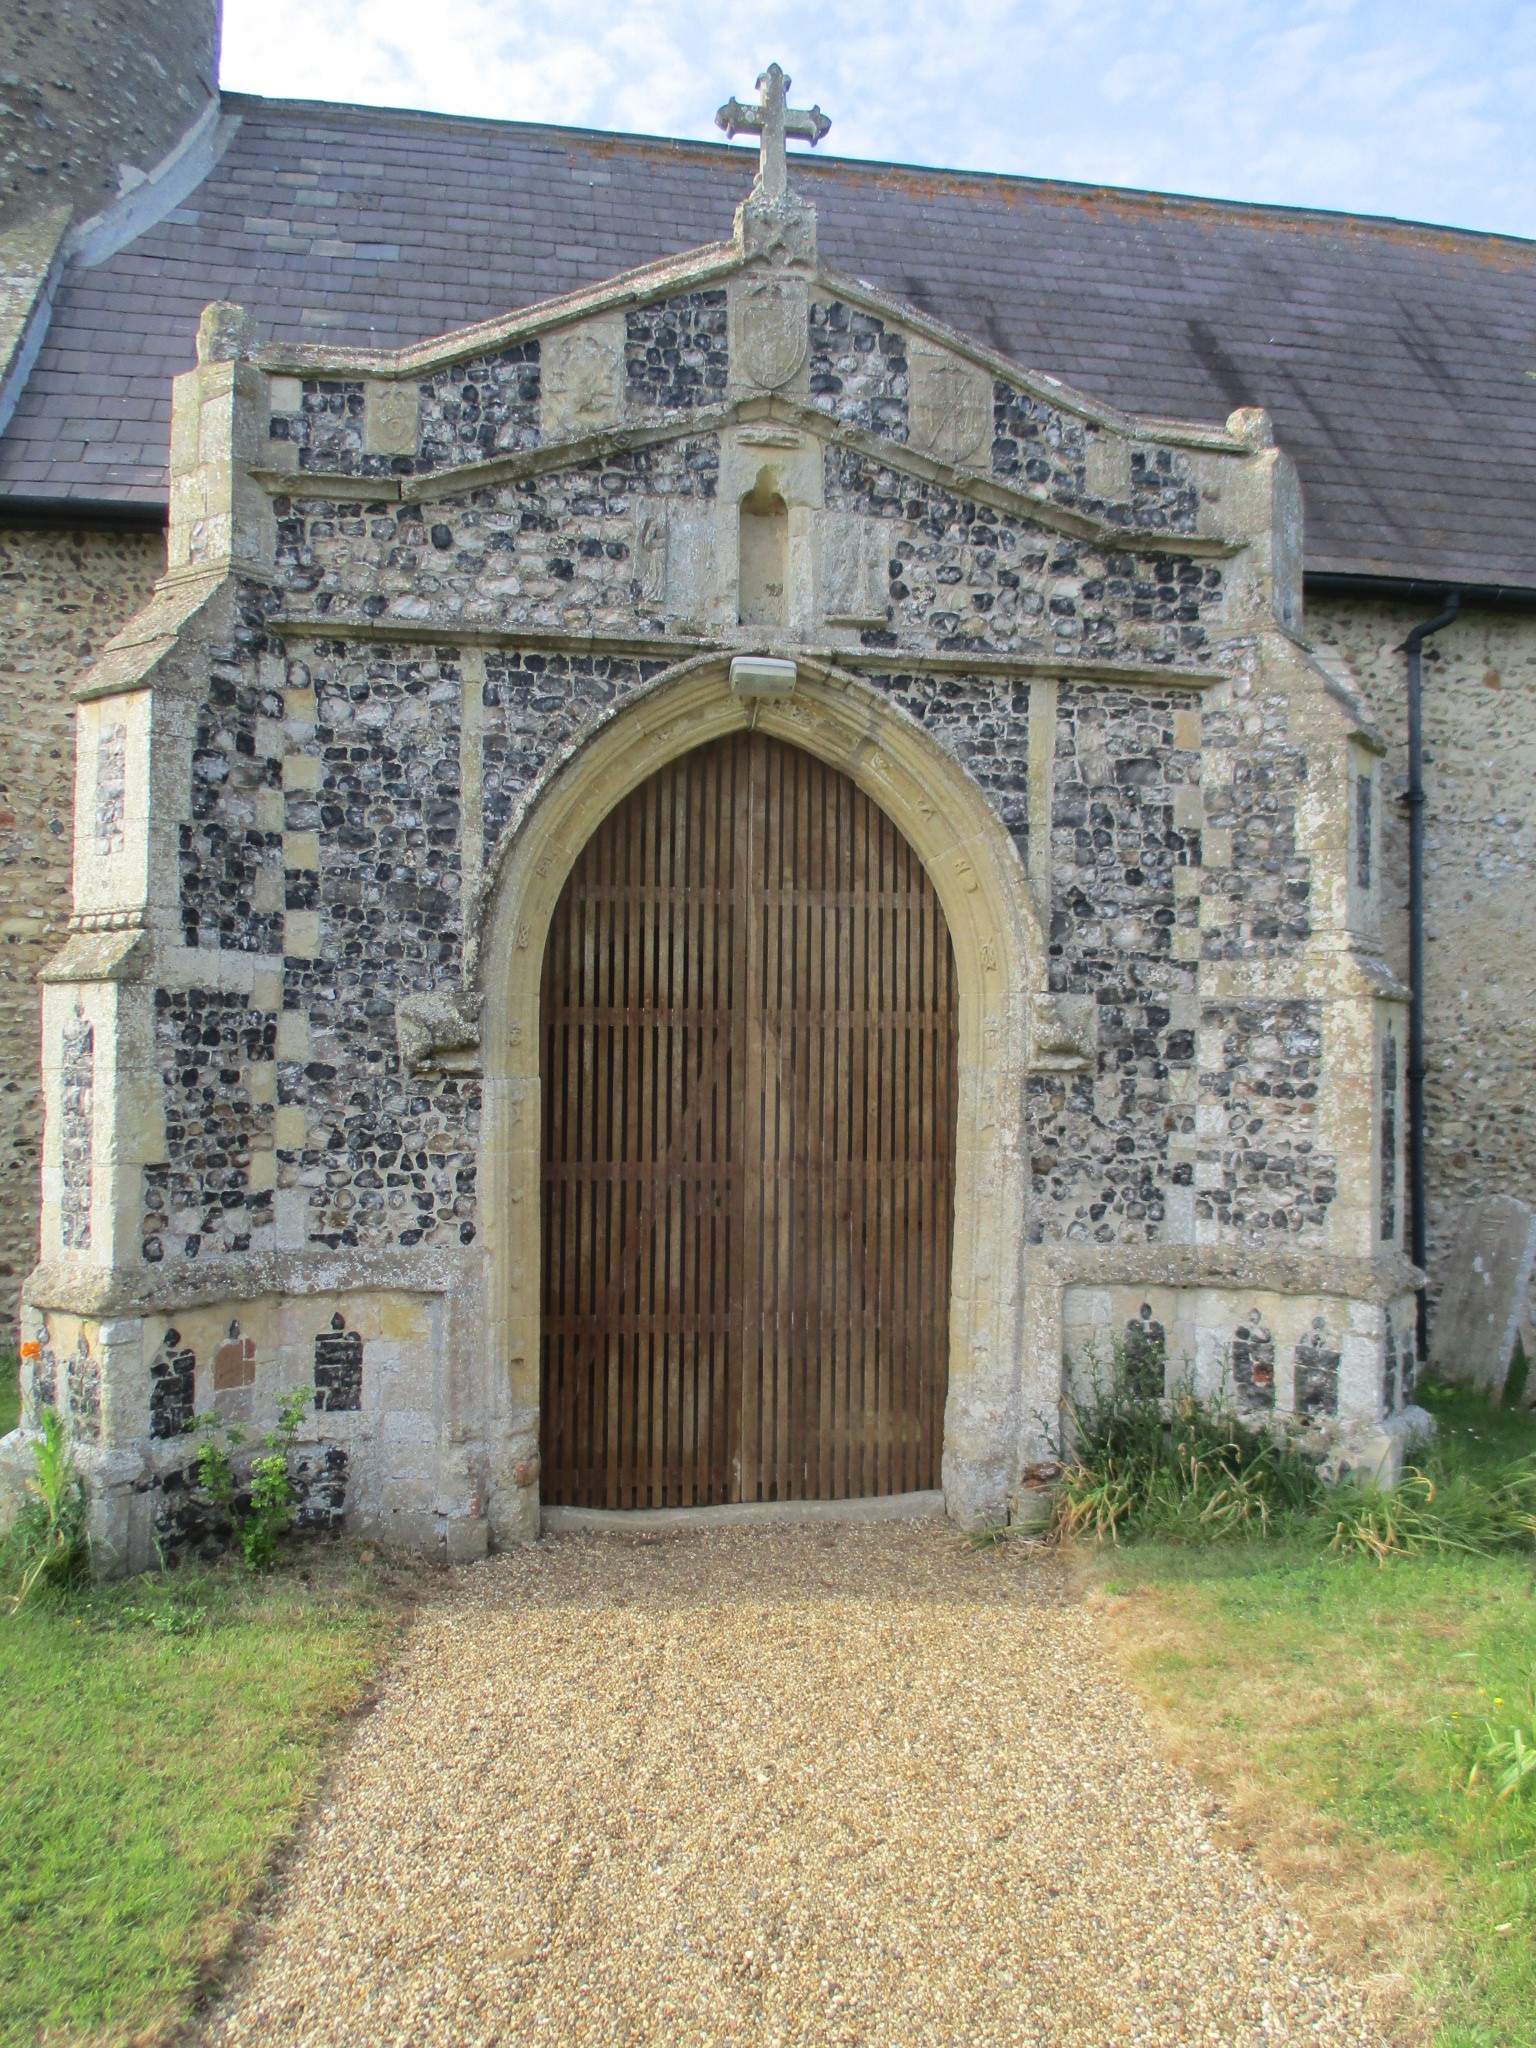 Large church entry doors - stripped